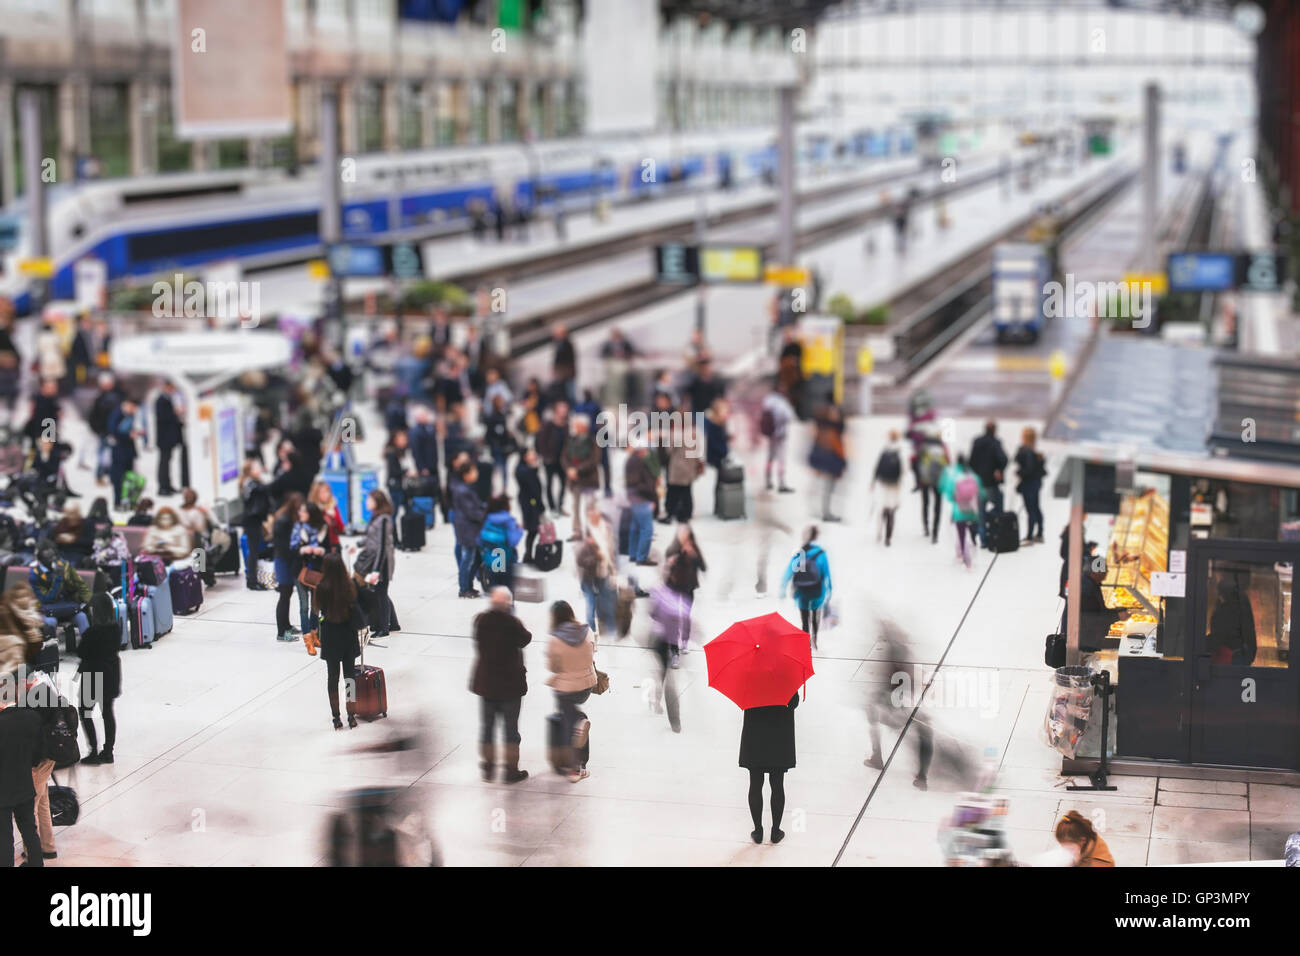 woman with red umbrella waiting at train station and blurred people in motion, solitude concept Stock Photo